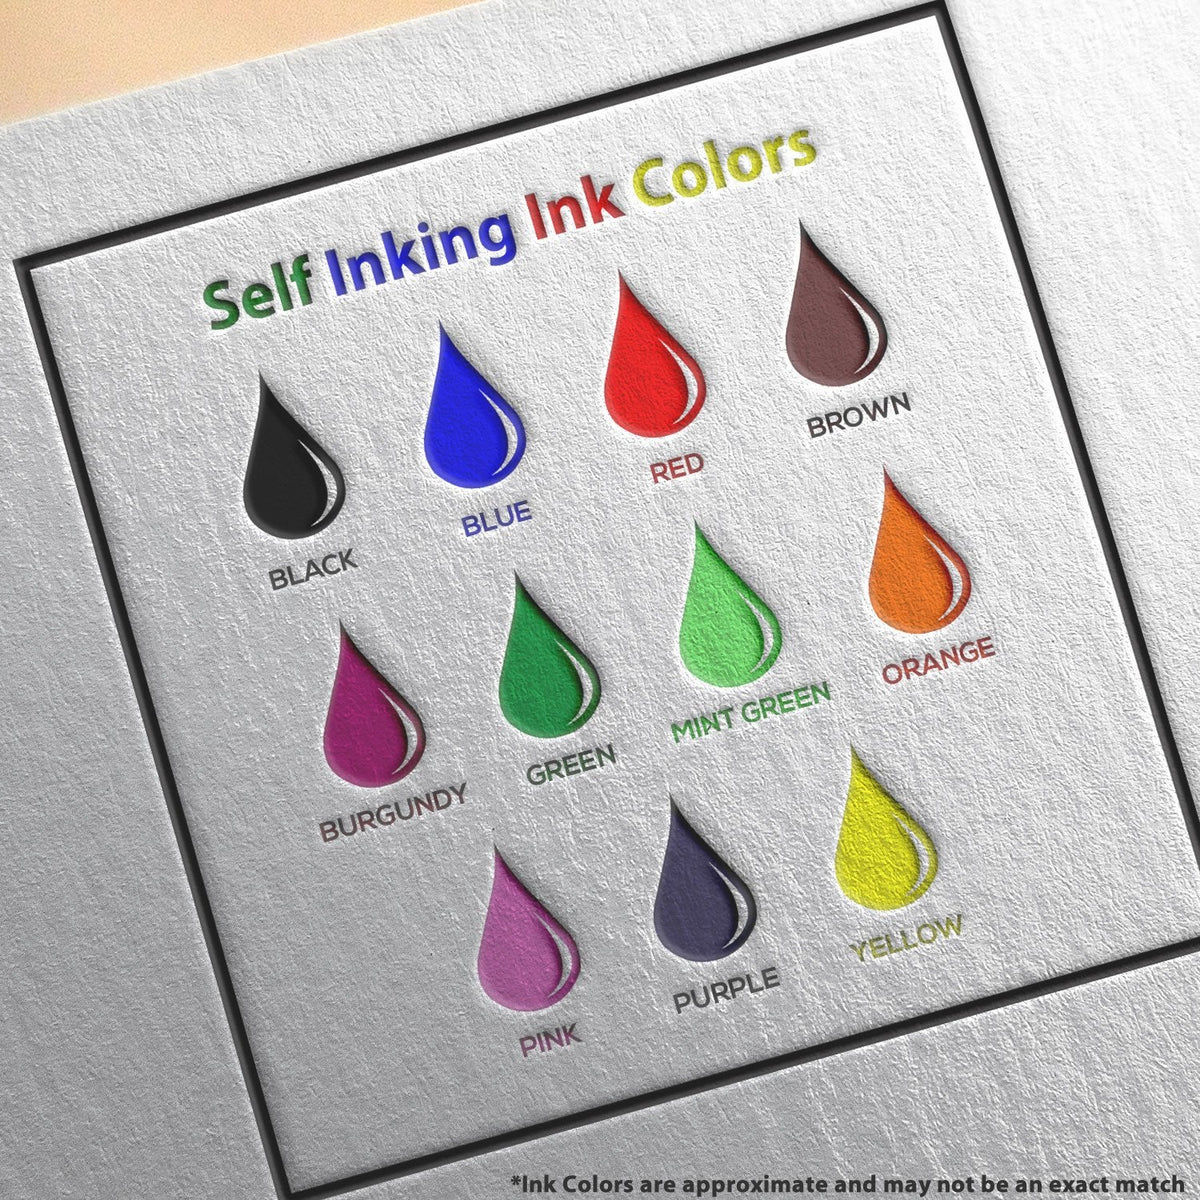 Self-Inking Round Please Return to Classroom Library Stamp Ink Color Options